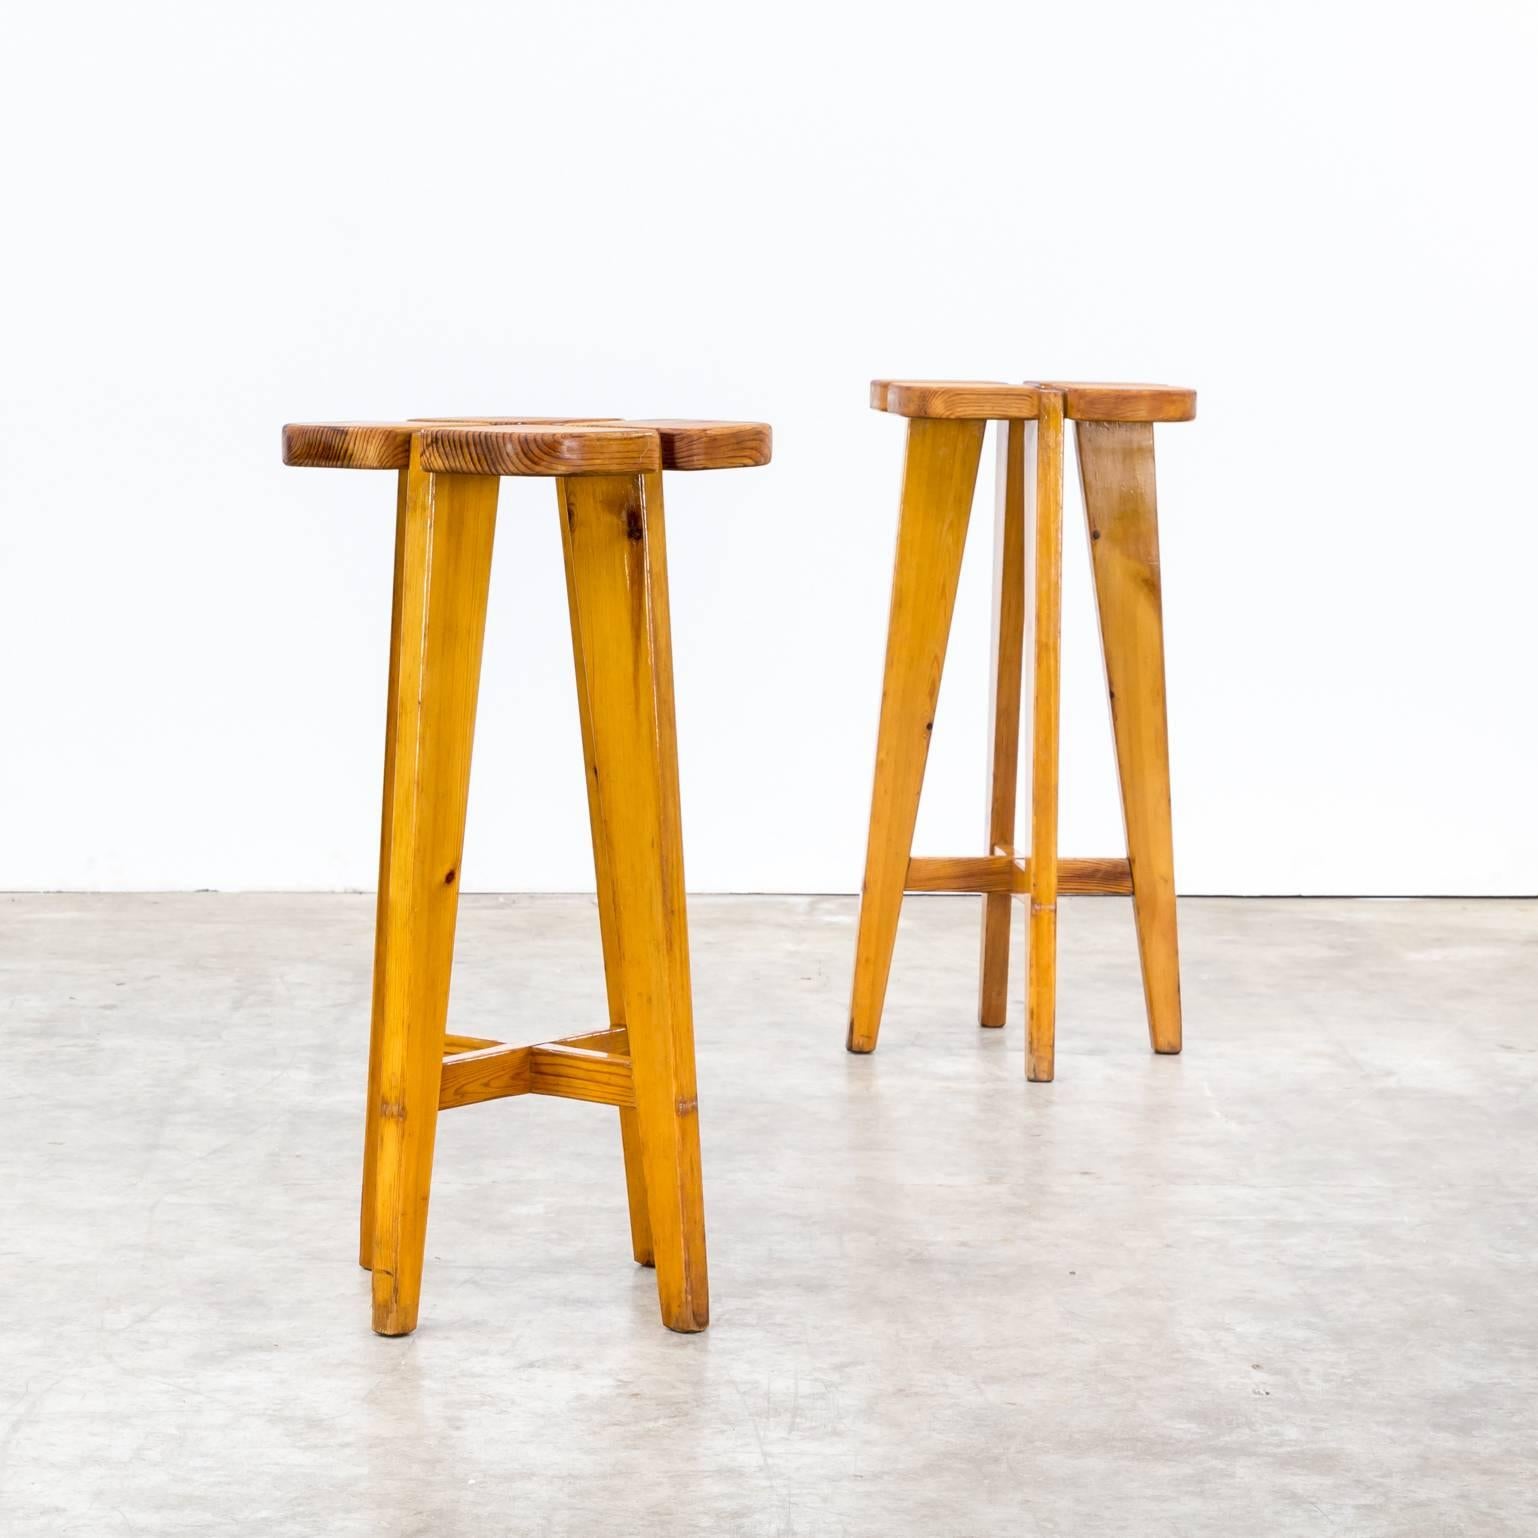 Lisa Johansson Pape pine stools for Stockmann AB, set of two. Tall stools, good condition wear consistent with age and use.